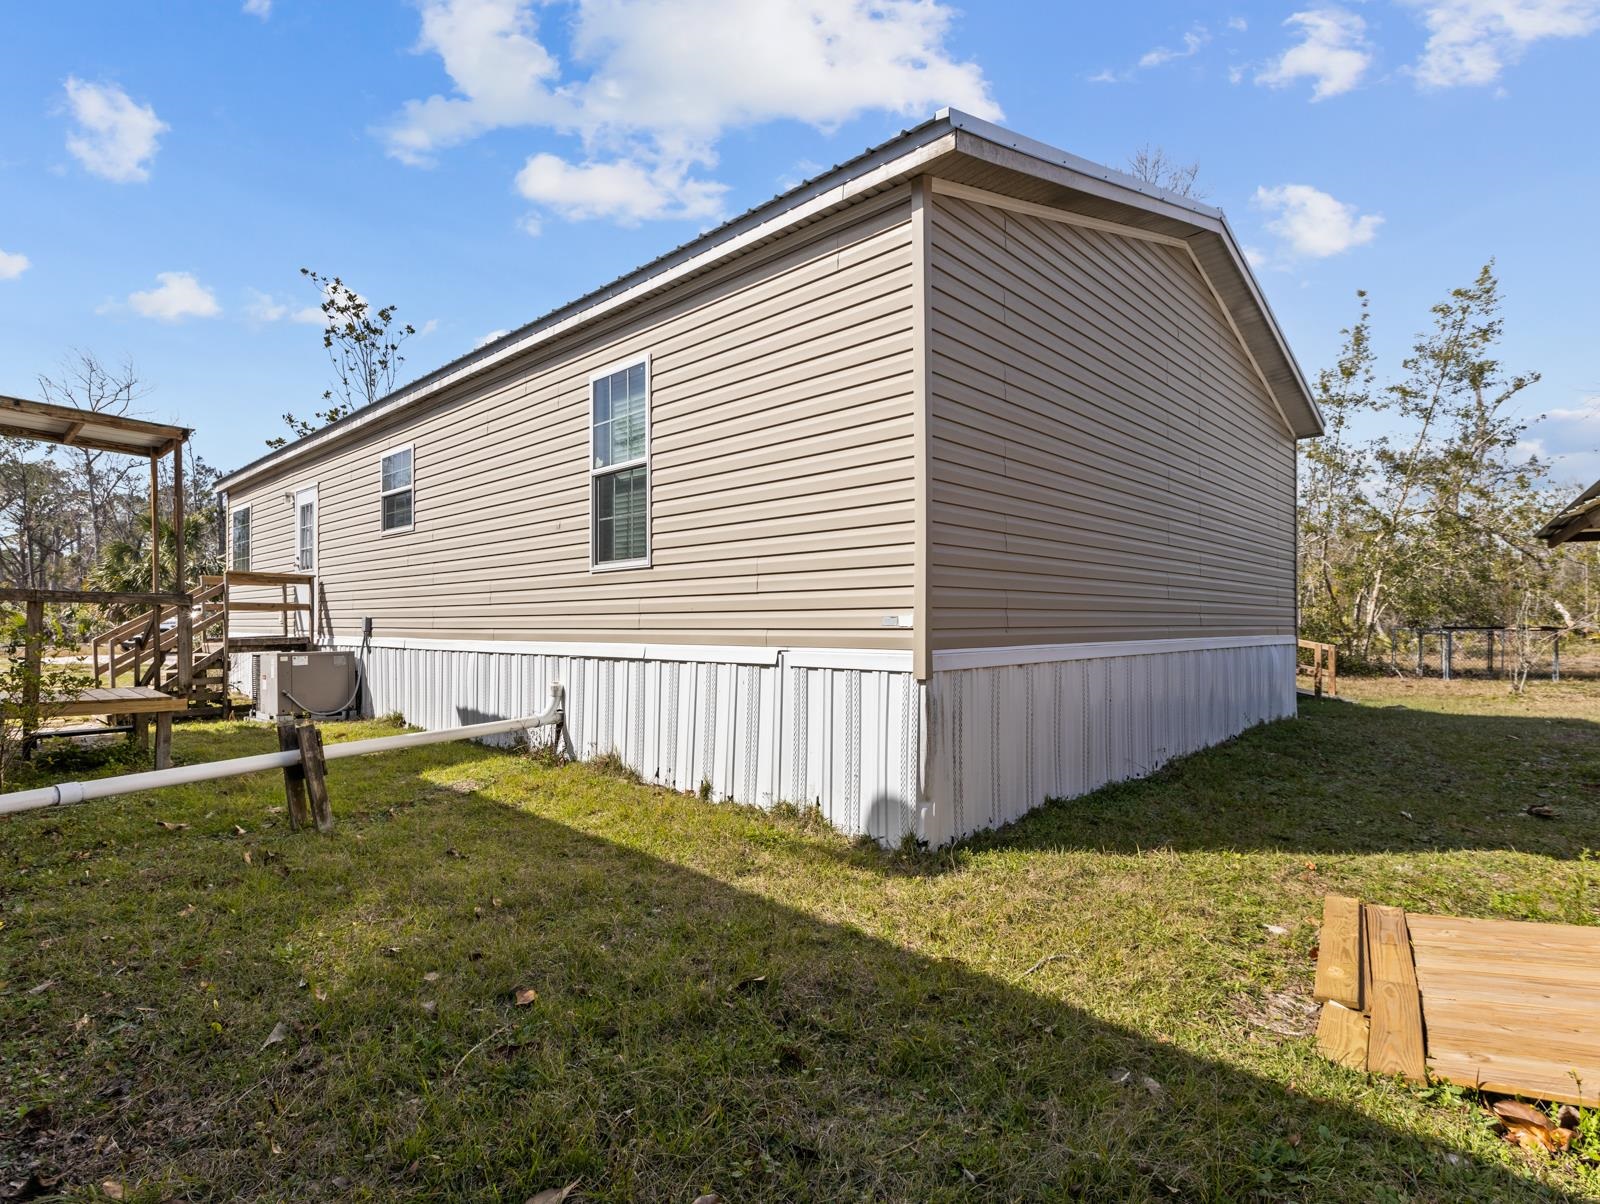 11230 W Woodland Drive,PERRY,Florida 32348,3 Bedrooms Bedrooms,2 BathroomsBathrooms,Manuf/mobile home,11230 W Woodland Drive,368417